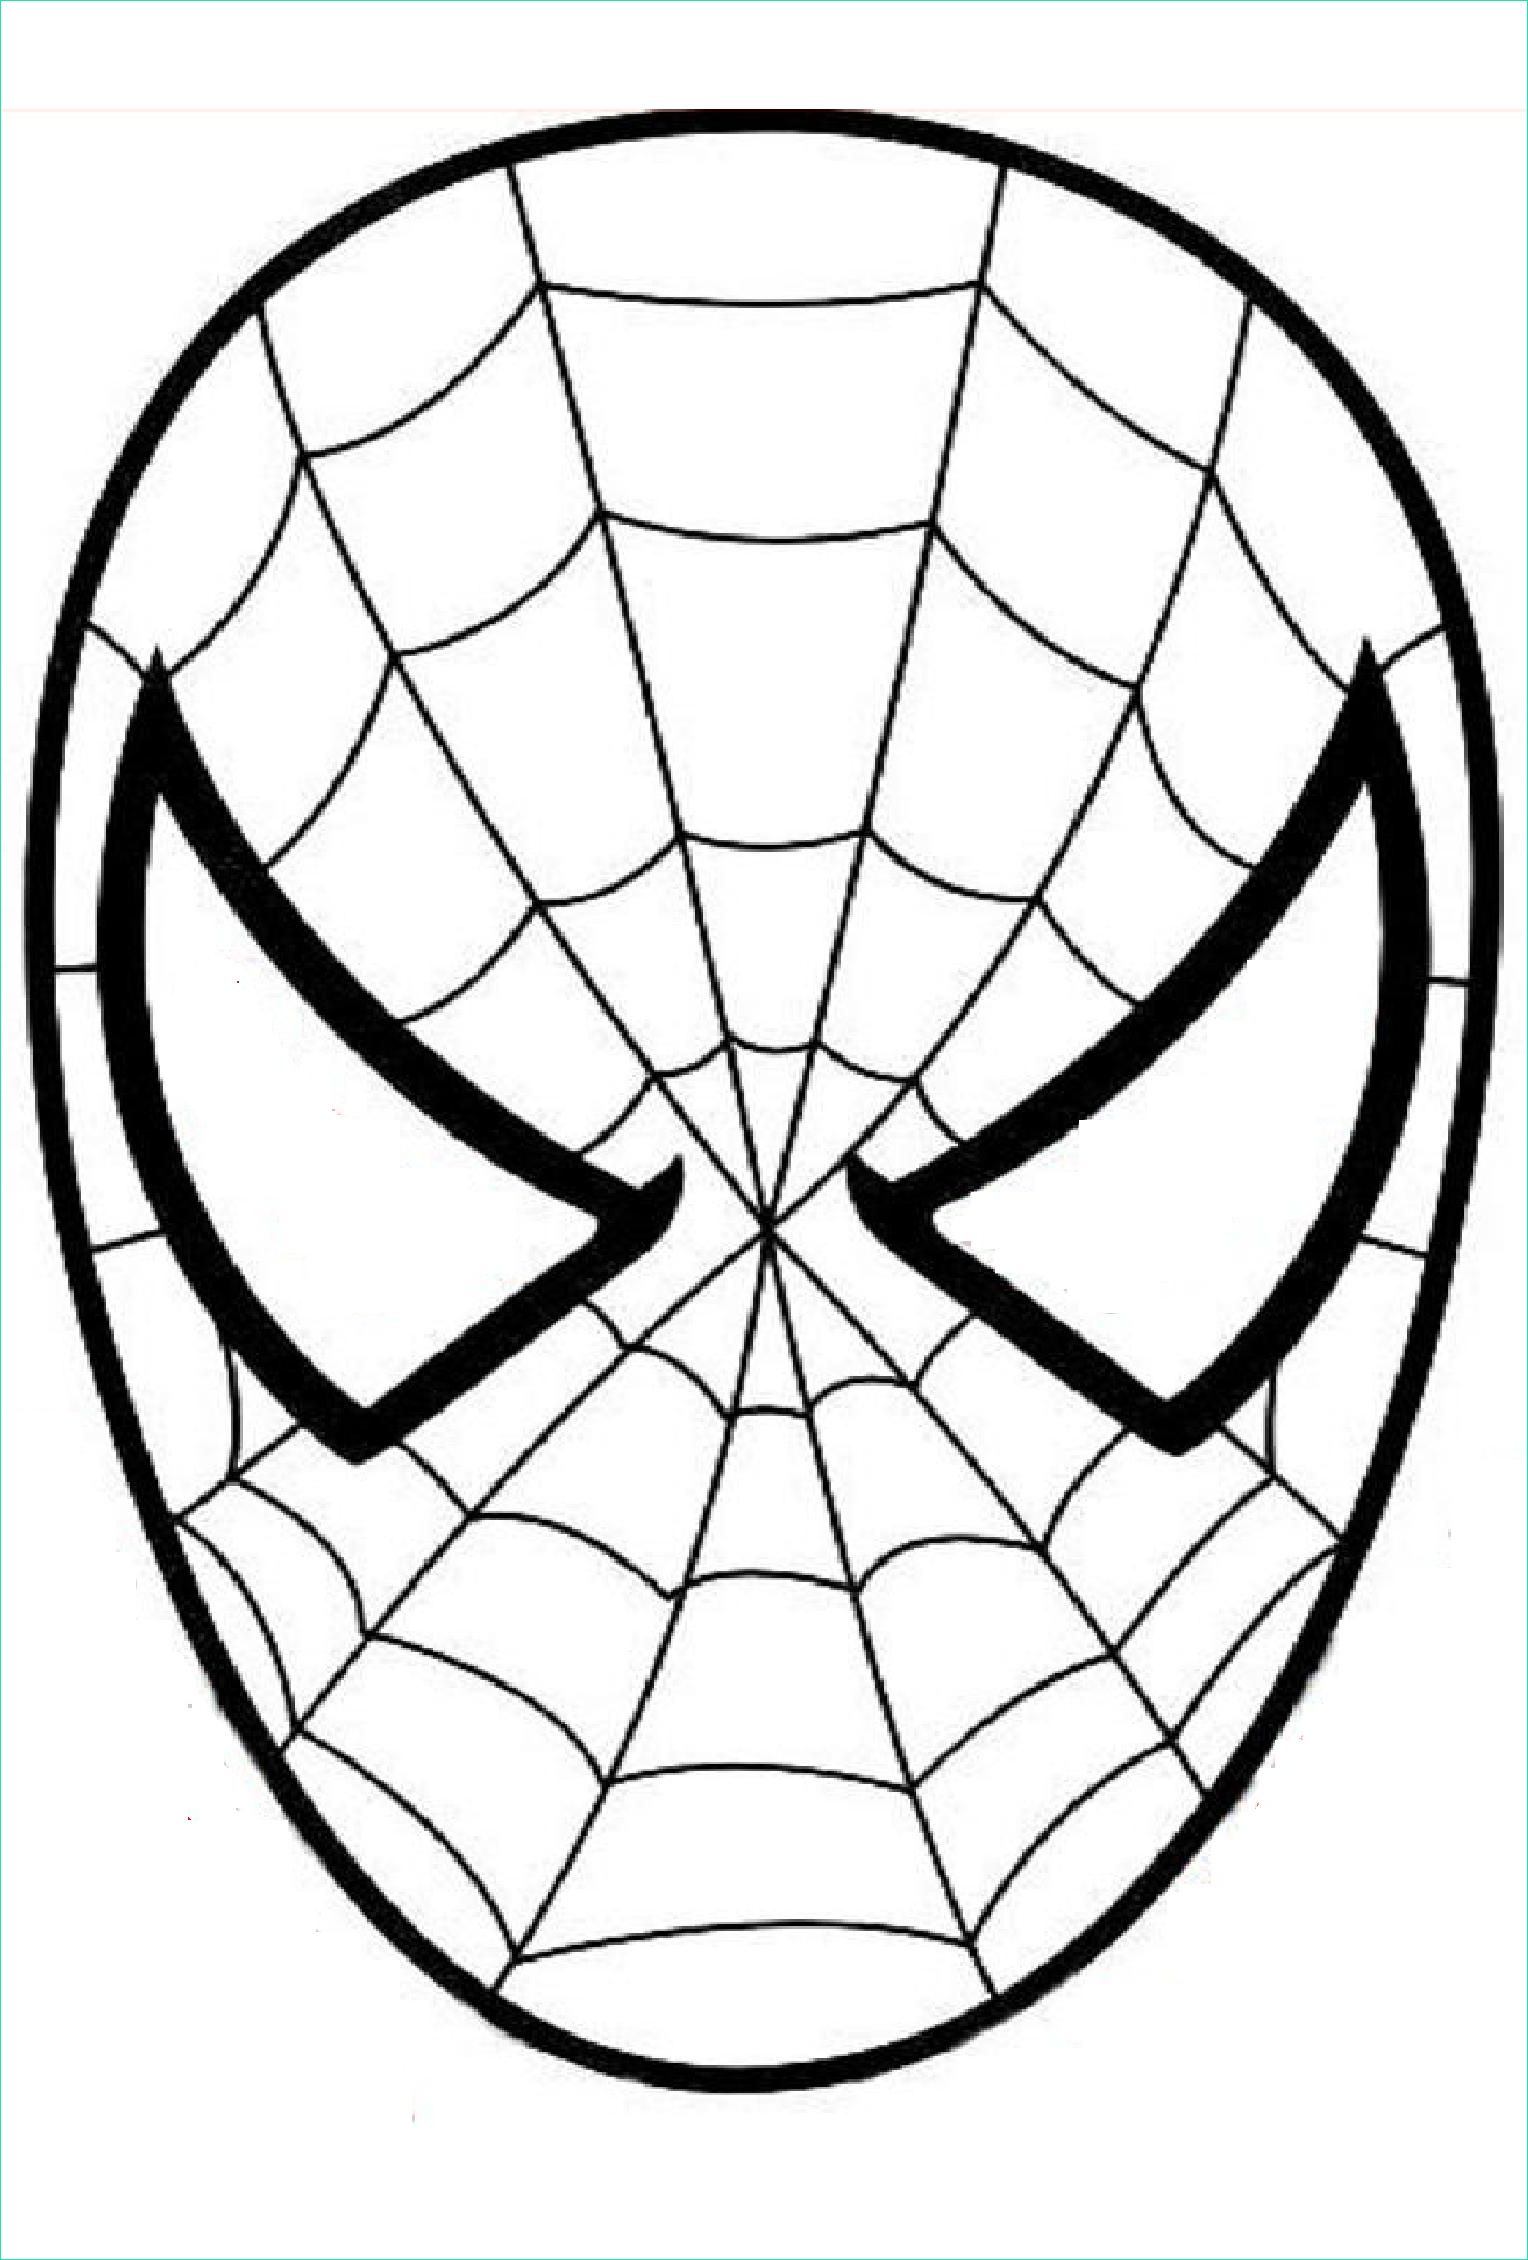 image=spiderman Coloring for kids spiderman 1